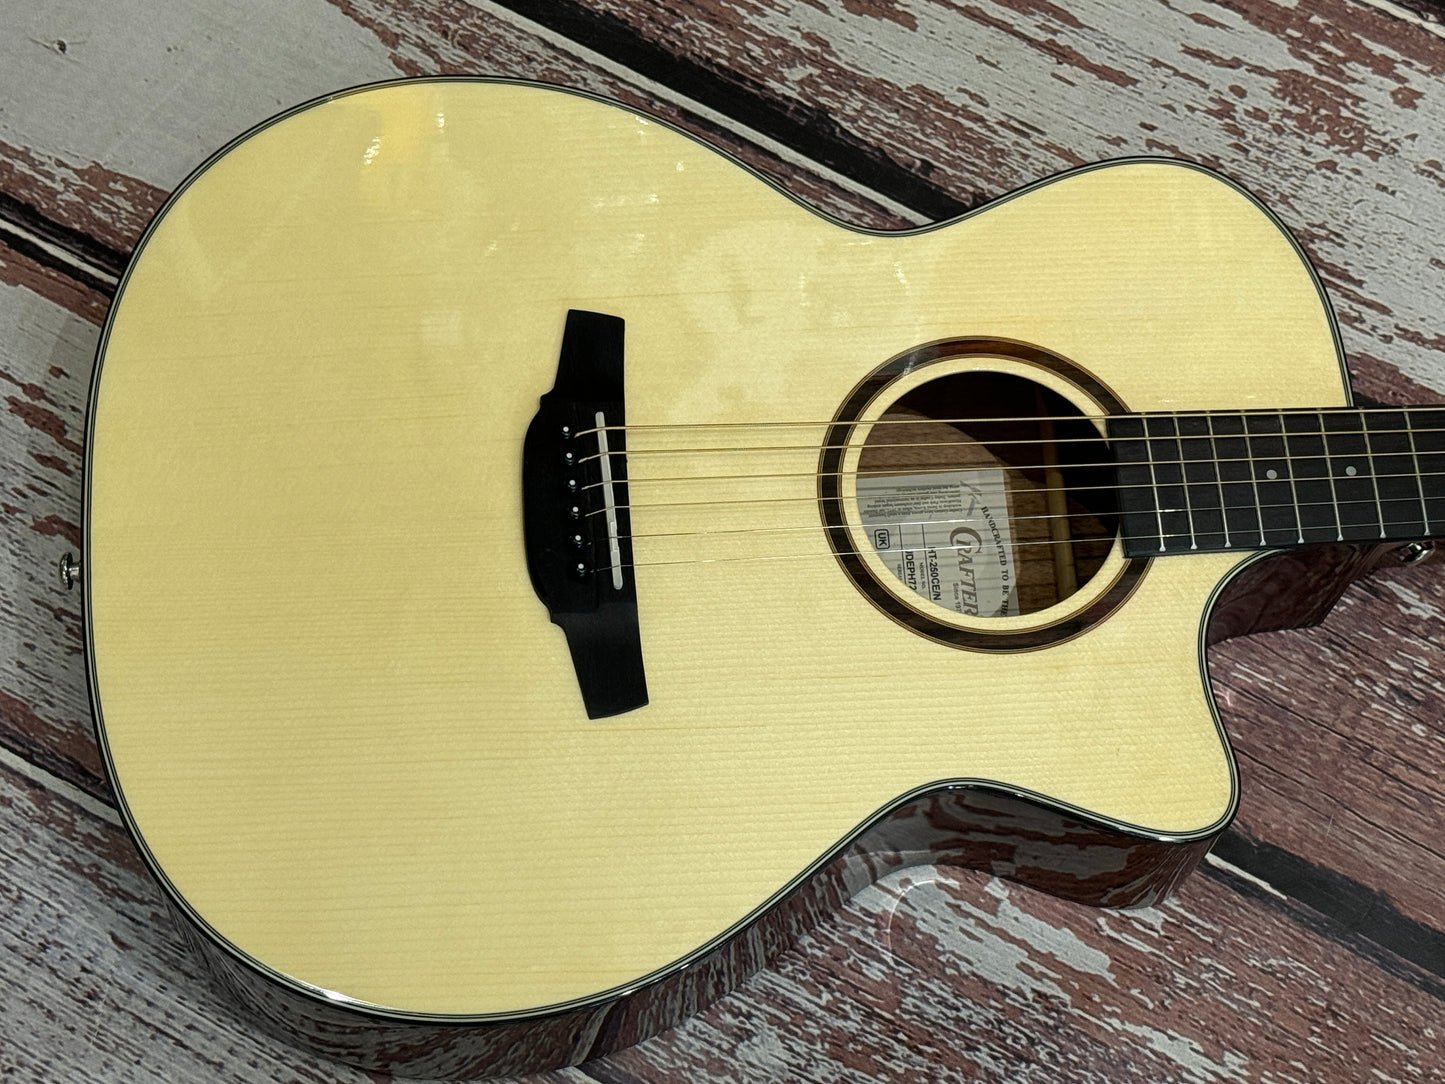 Crafter HT-250 CE Natural Electro acoustic